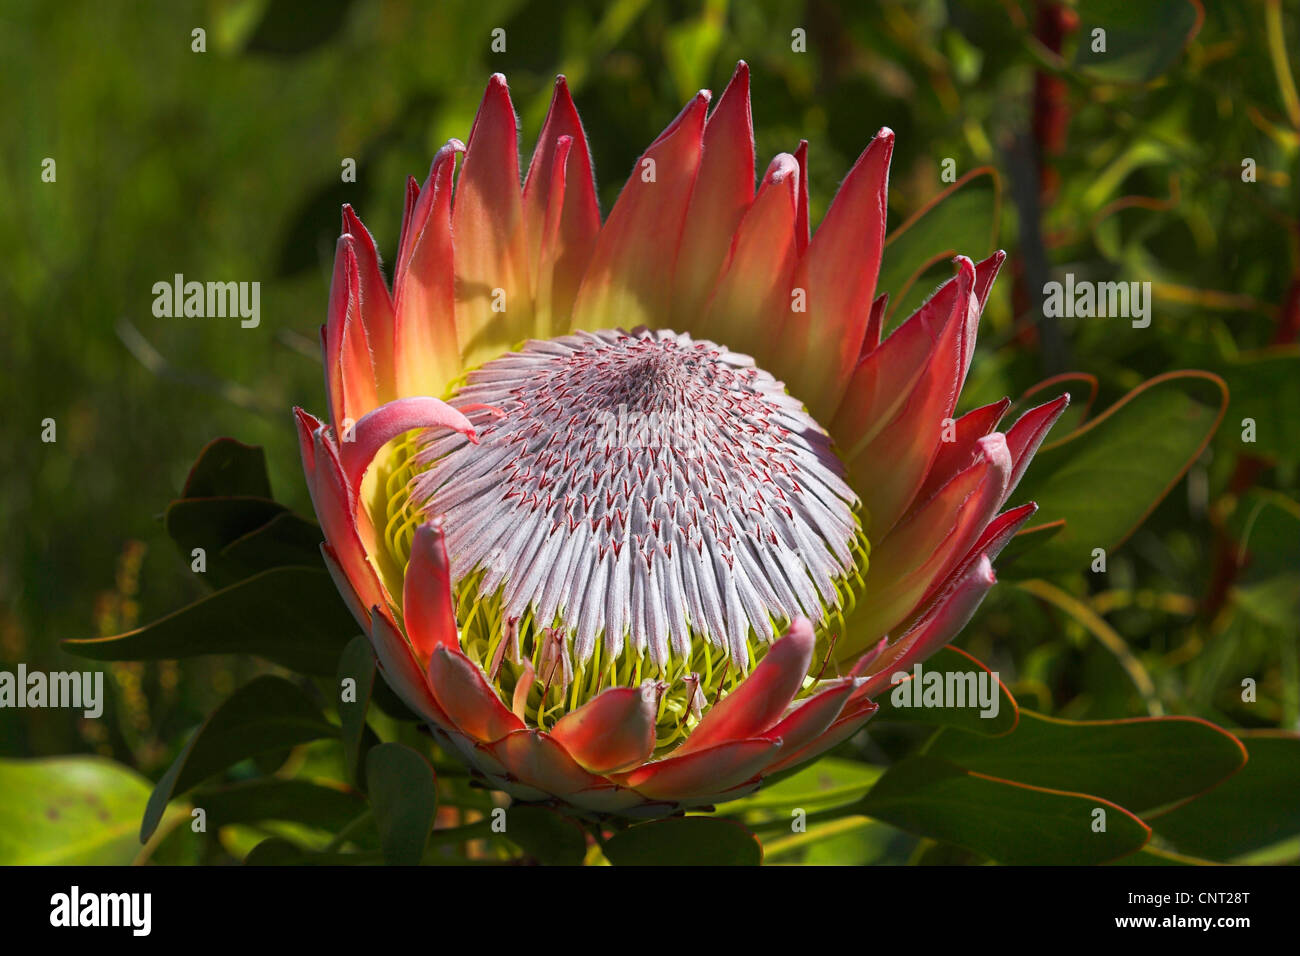 King Protea (Protea cynaroides), inflorescence, national flower of South Africa, South Africa Stock Photo